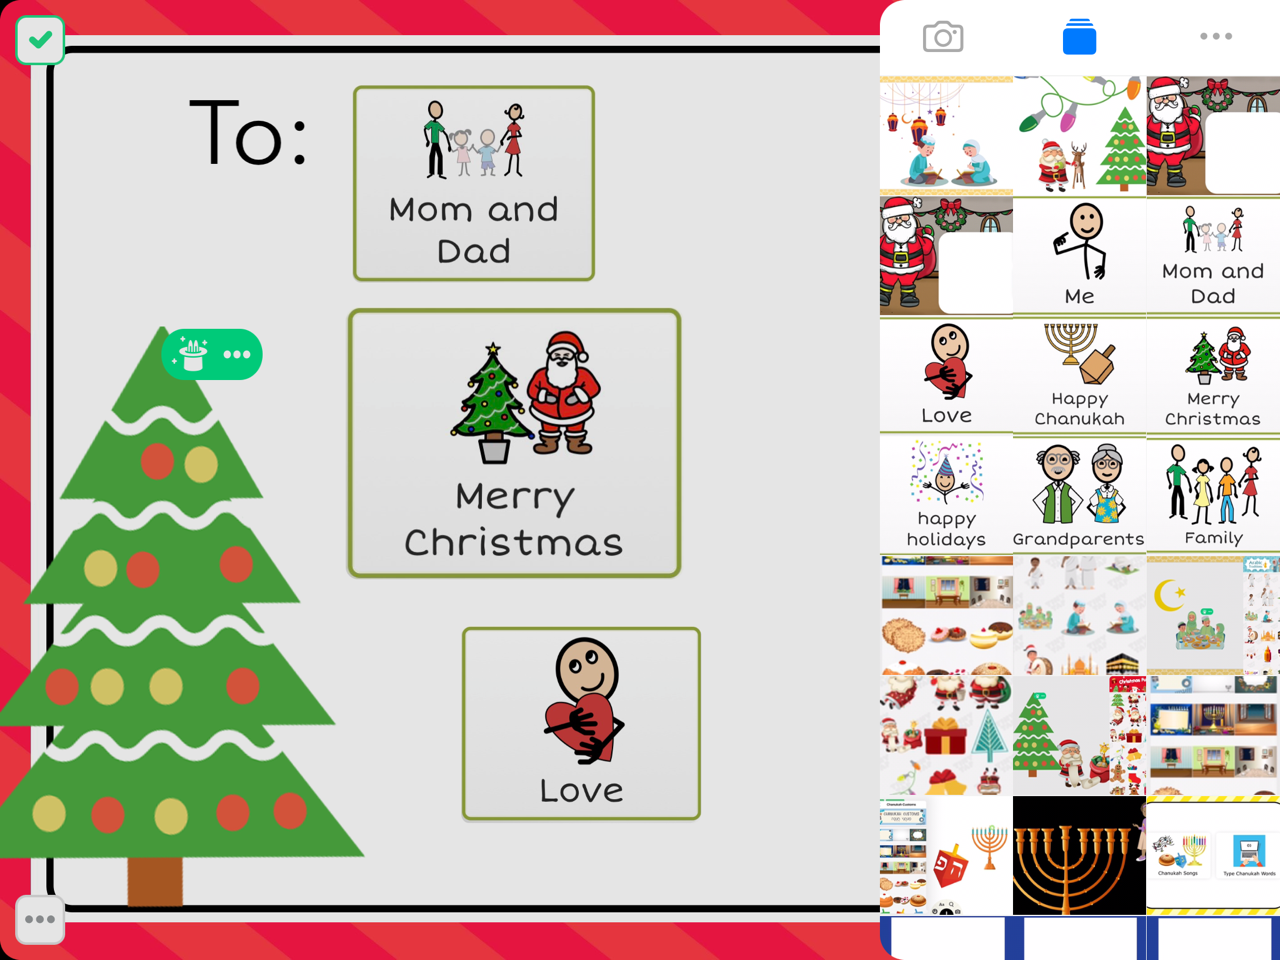 Screenshot with chrsitmas tree, symbols for "mom and dad", "Merry Christmas", and "Love"